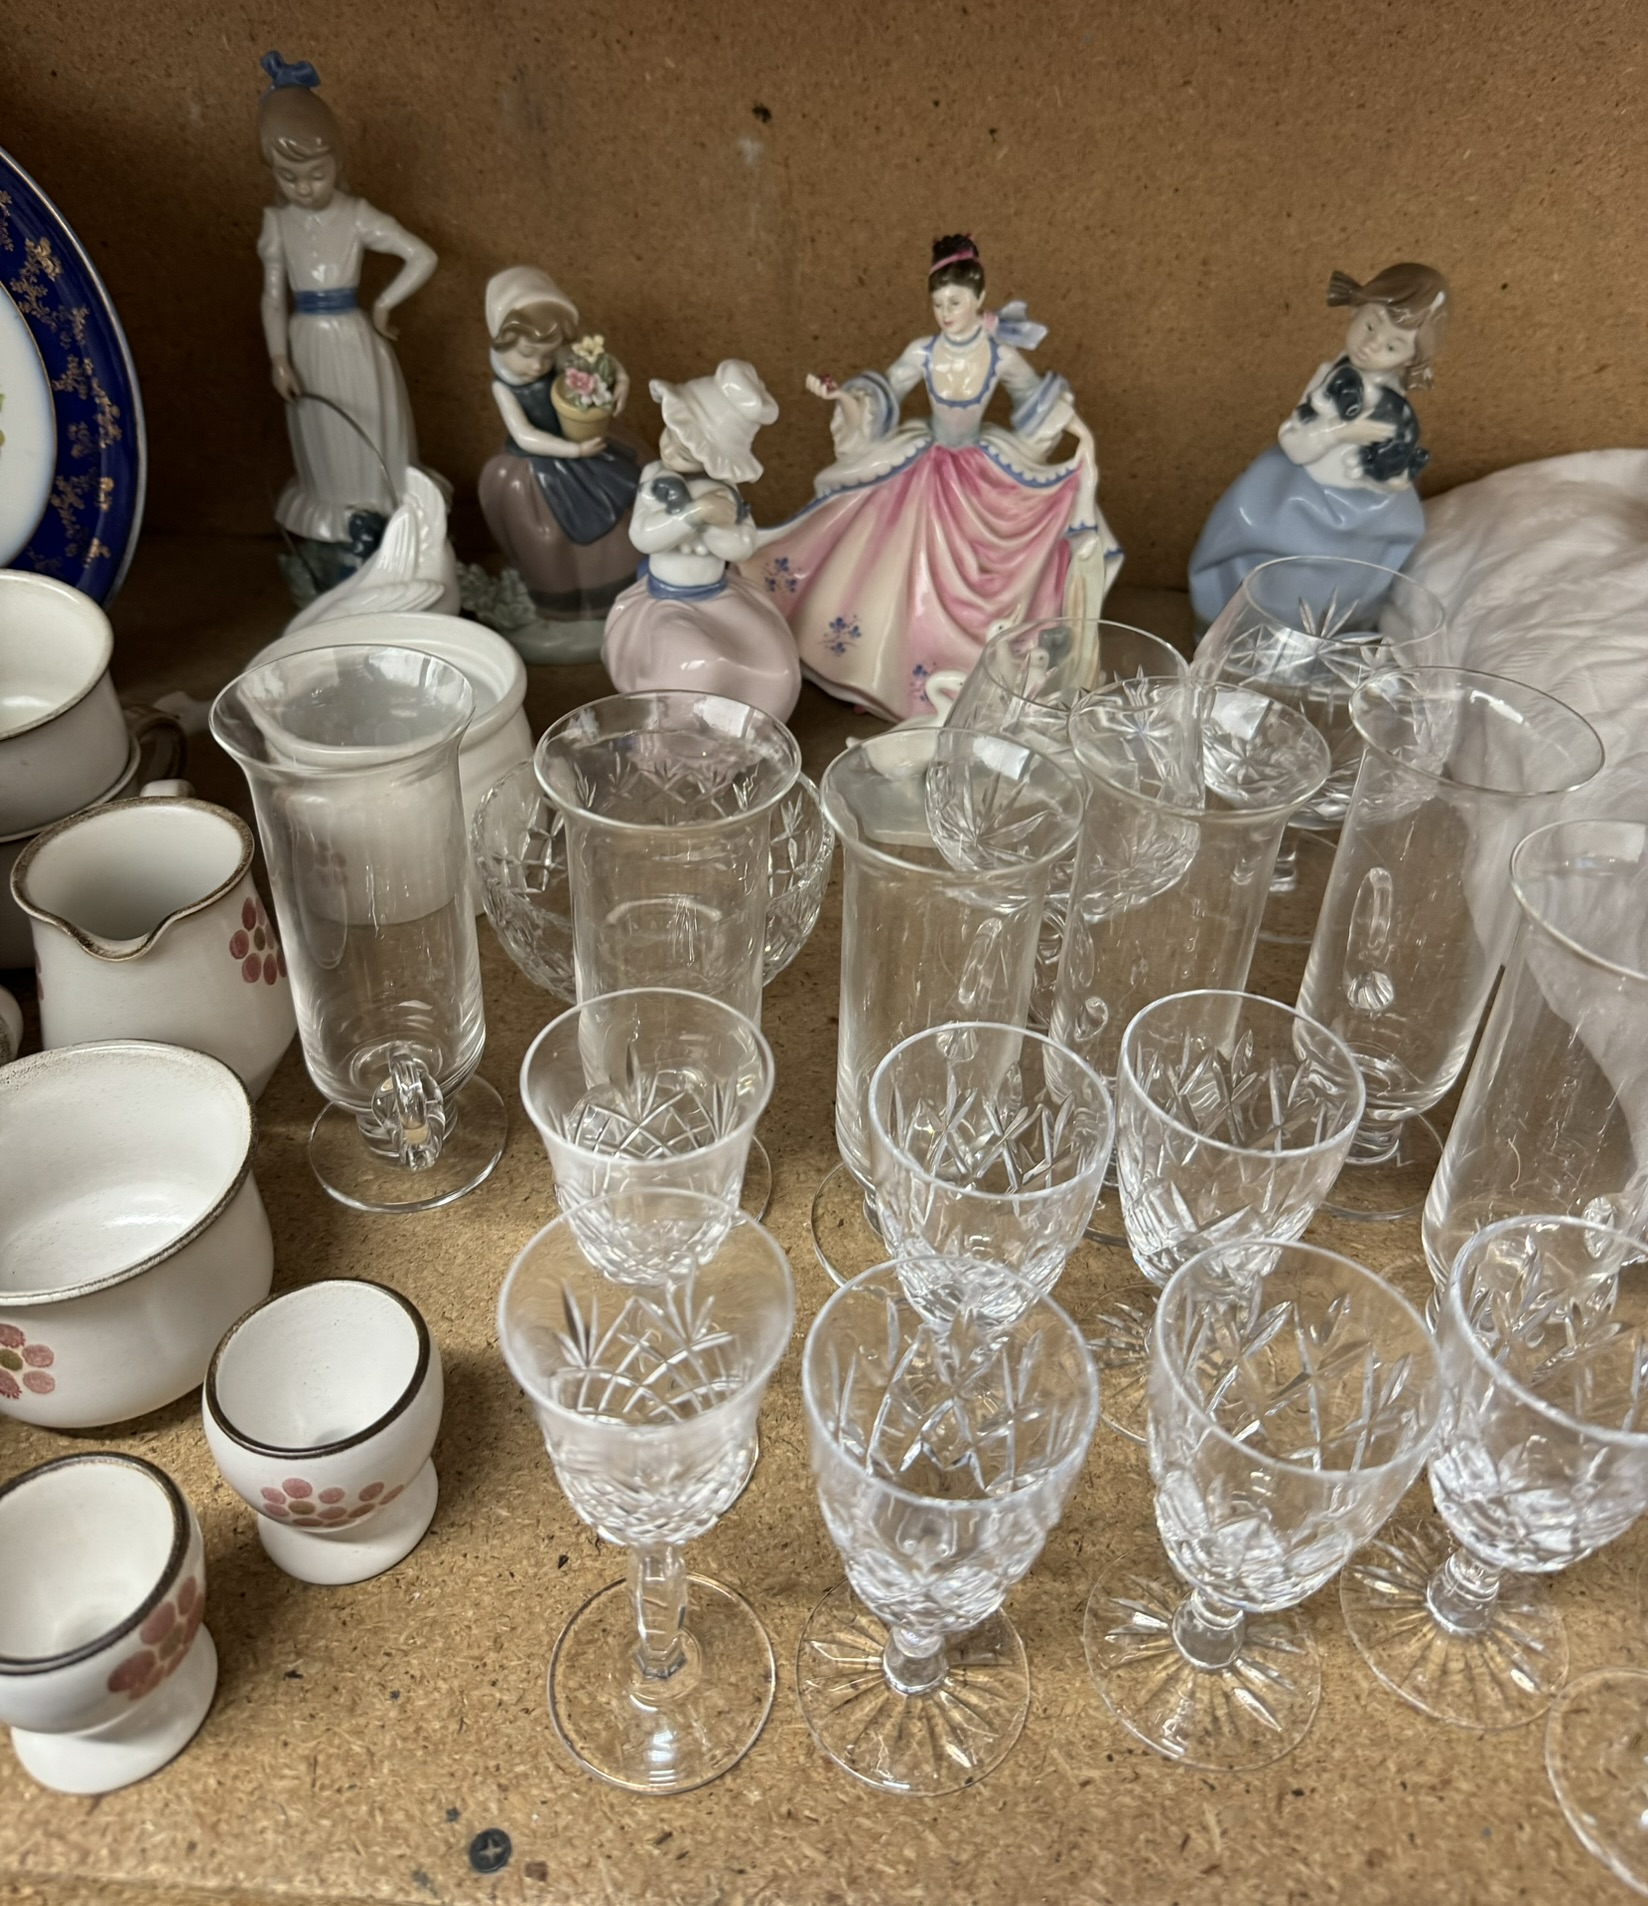 A Royal Doulton figure Rebecca HN 2805 together with a Lladro figure, Nao figures, drinking glasses, - Image 2 of 4